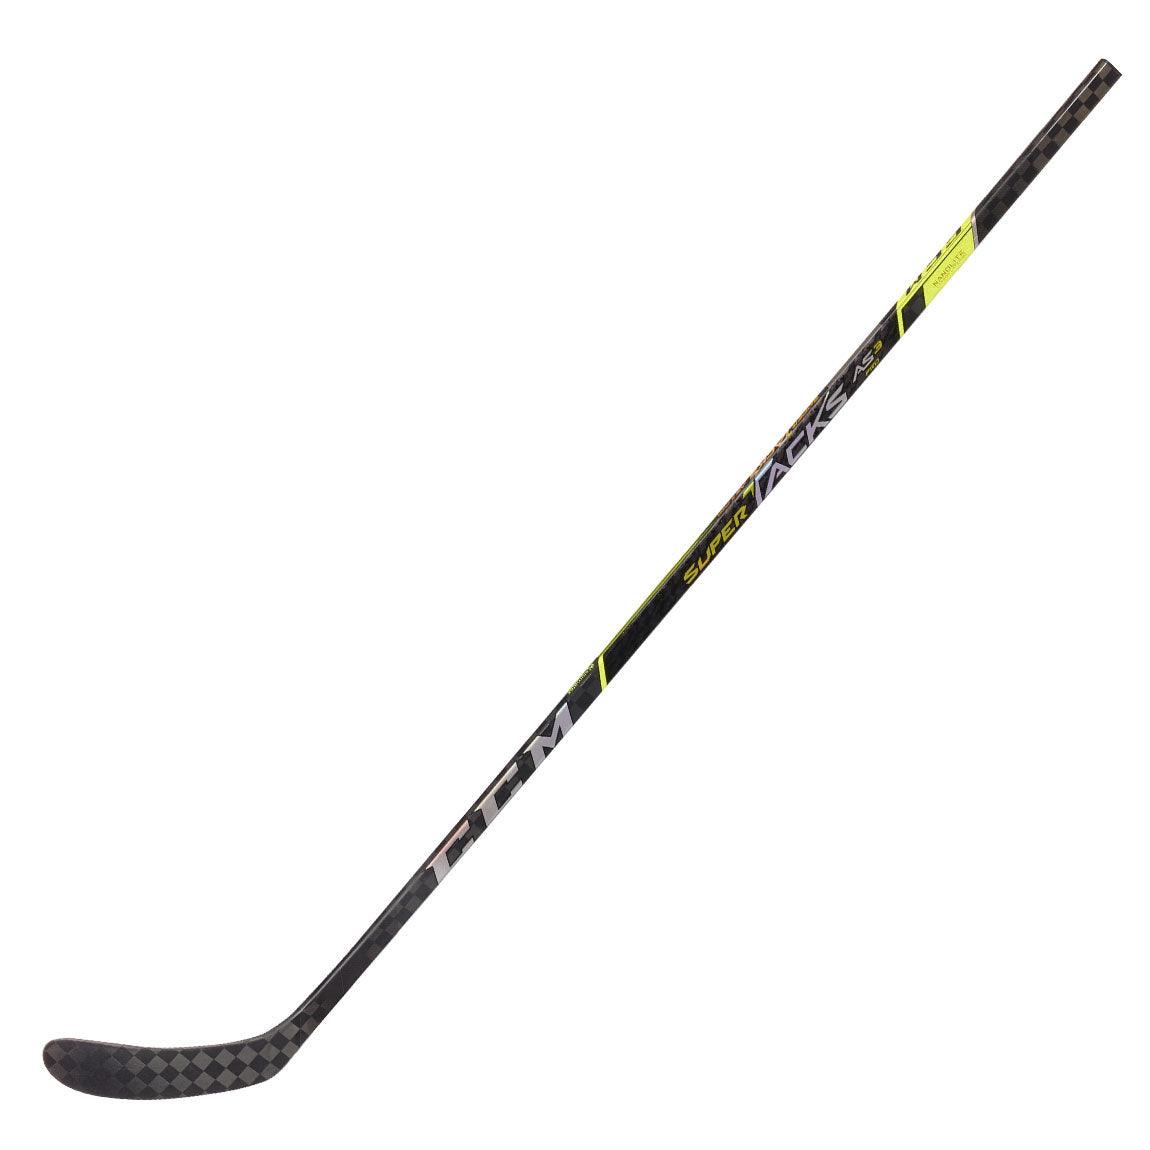 Super Tacks AS3 Pro Hockey Stick - Junior - Sports Excellence